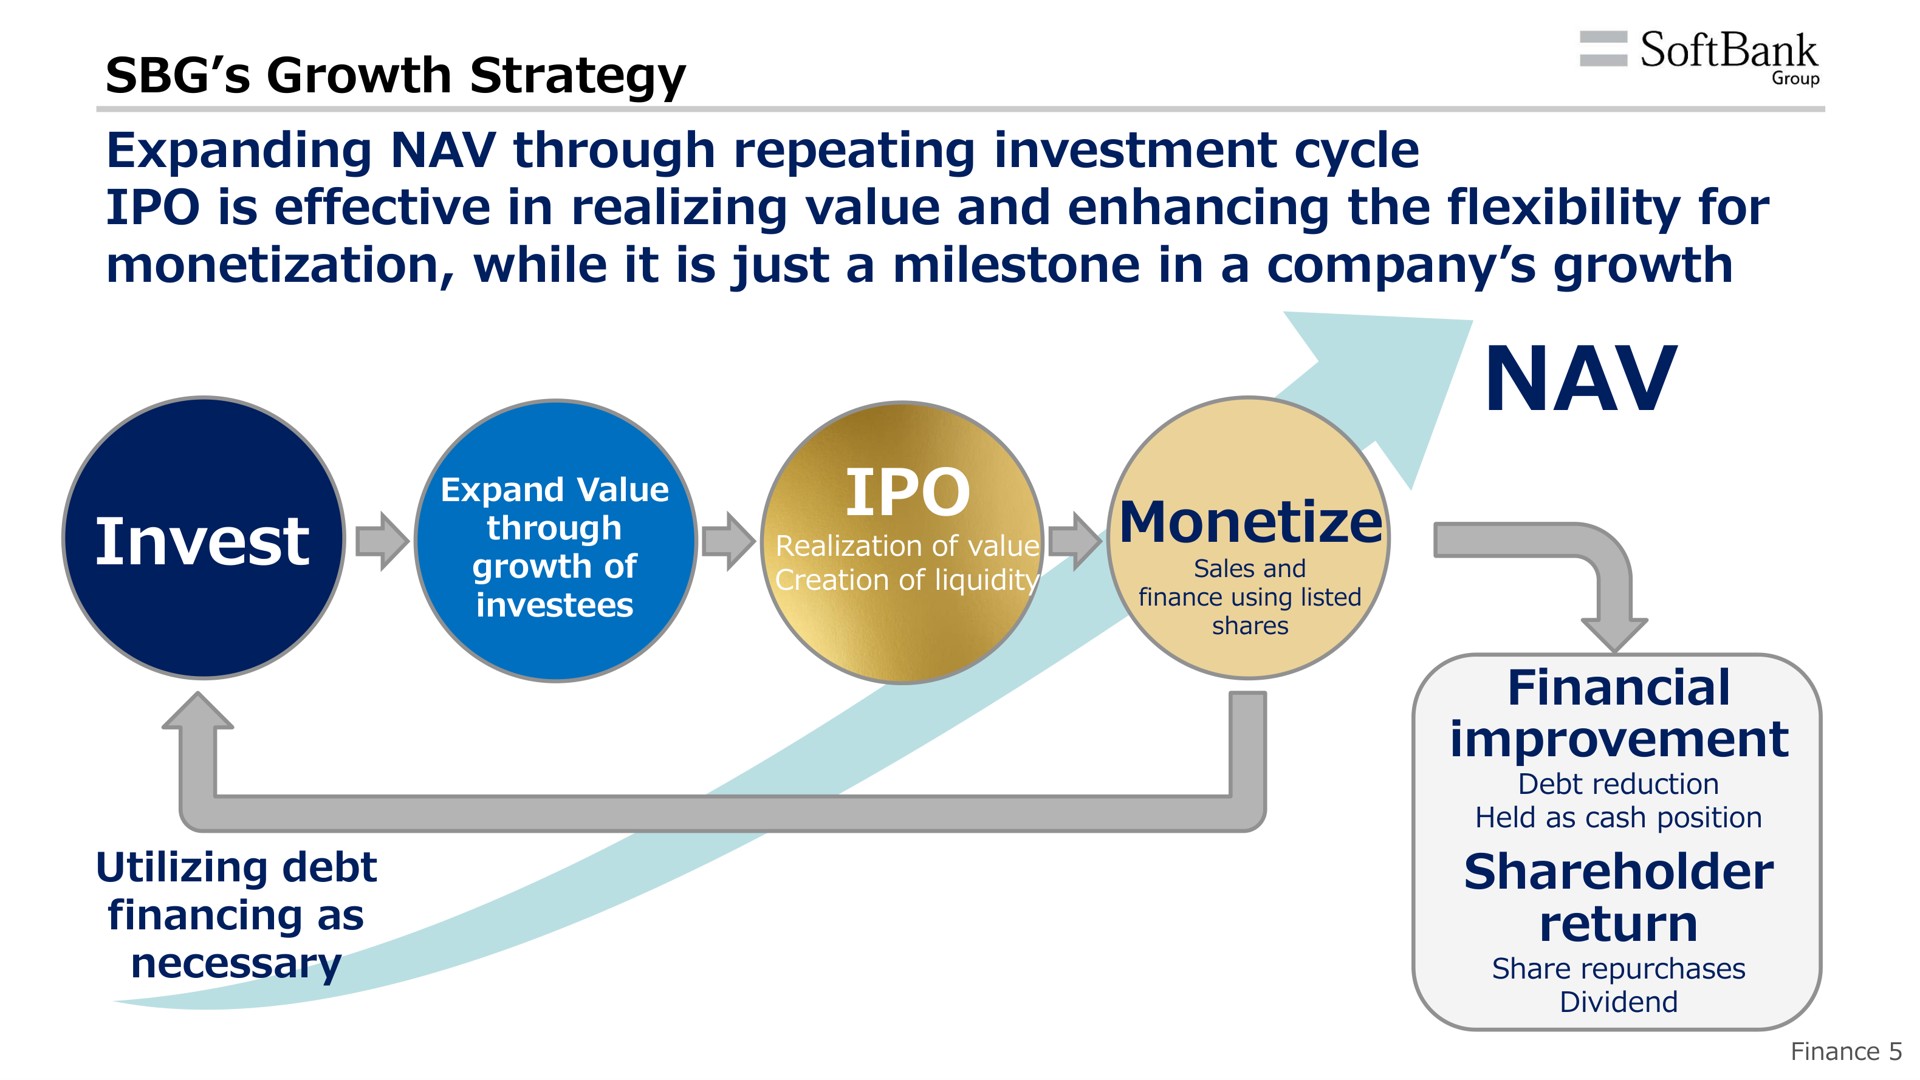 growth strategy expanding through repeating investment cycle is effective in realizing value and enhancing the flexibility for monetization while it is just a milestone in a company growth invest monetize financial improvement shareholder return | SoftBank